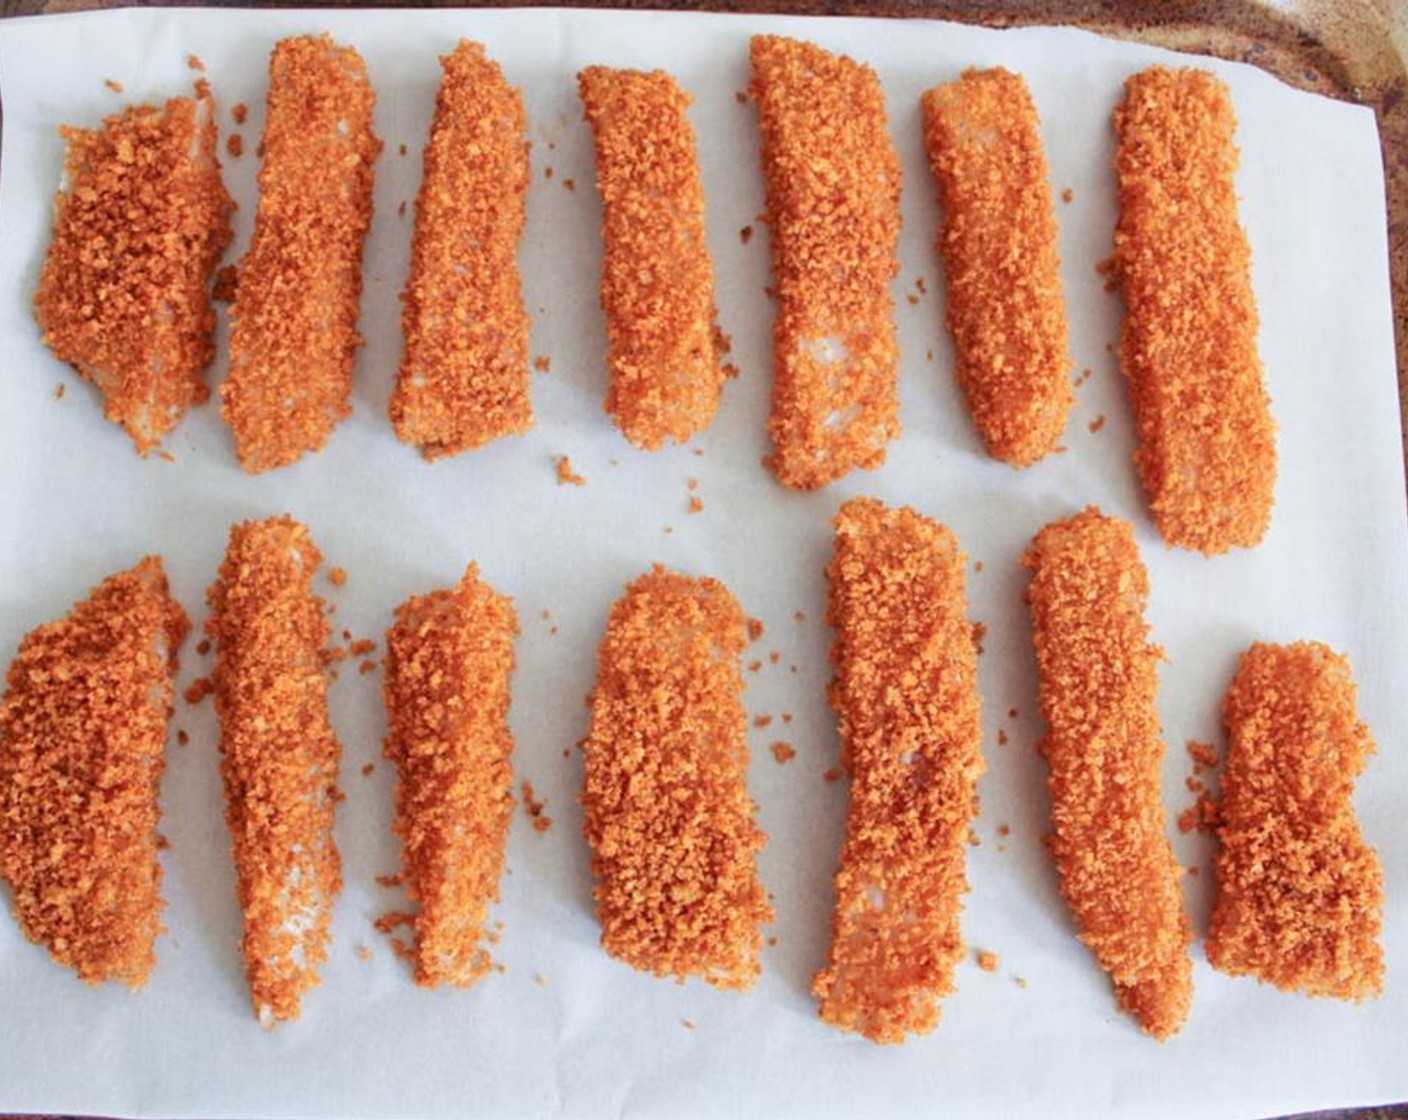 step 15 Place each piece of breaded fish on the baking sheet about an inch apart. Transfer the breaded fish to the oven and bake for 10 minutes until the fish is opaque throughout.